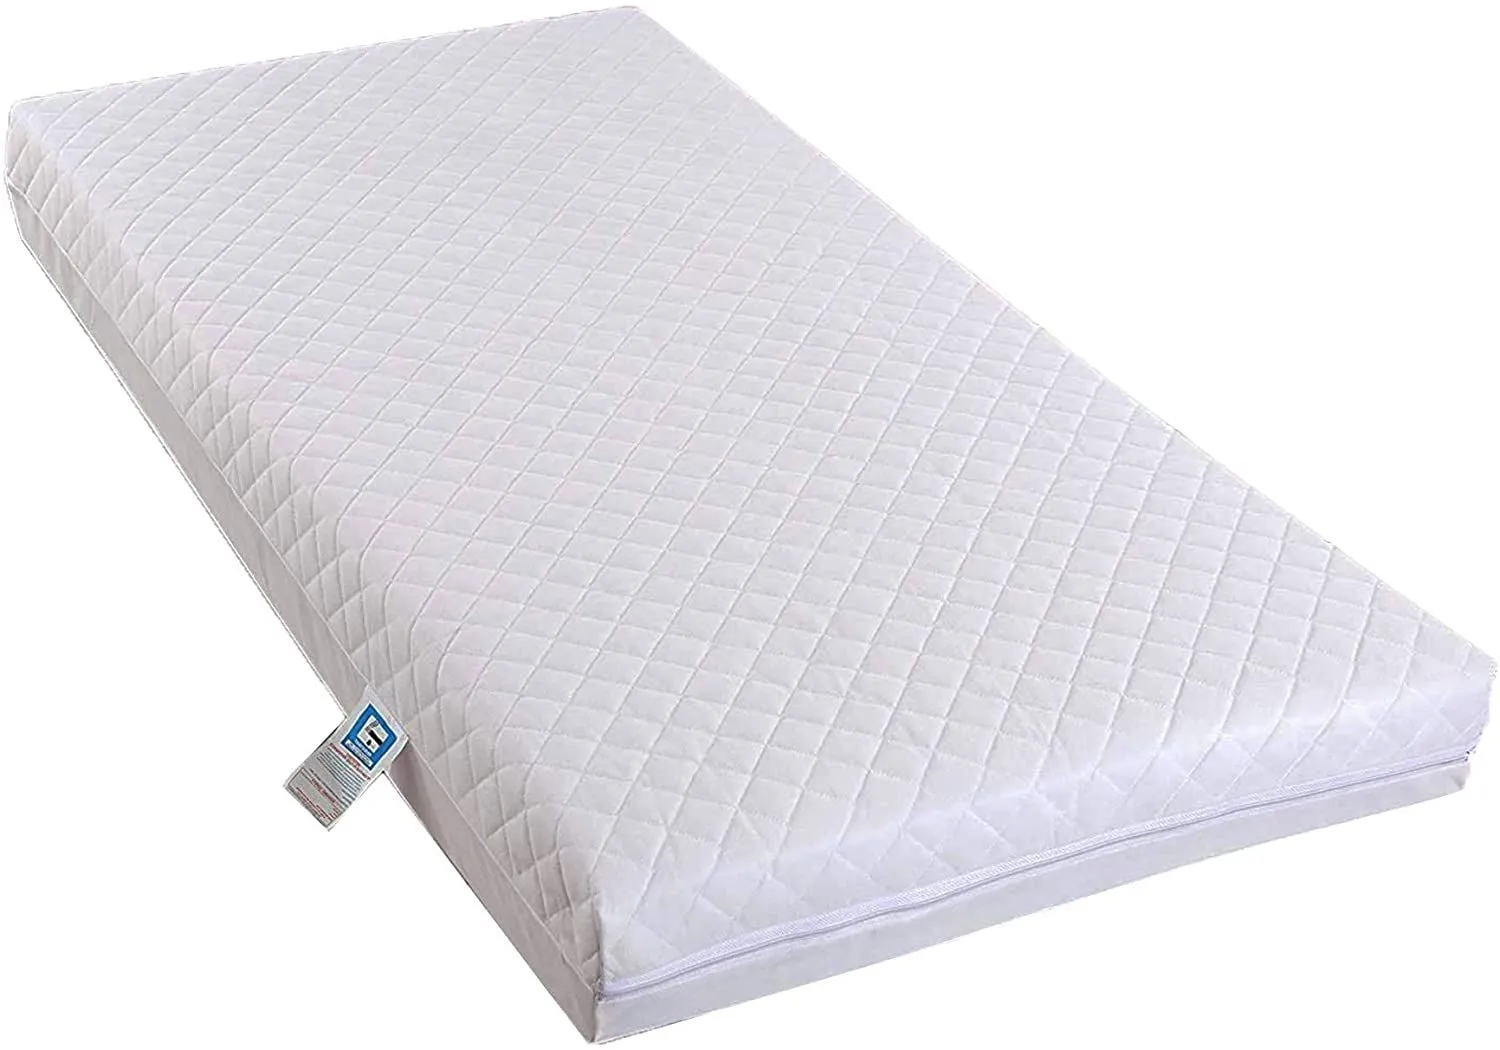 Baby Toddler Cot Bed Mattress Quilted Breathable Extra Thick 140X70CM 10 CM DEEP 